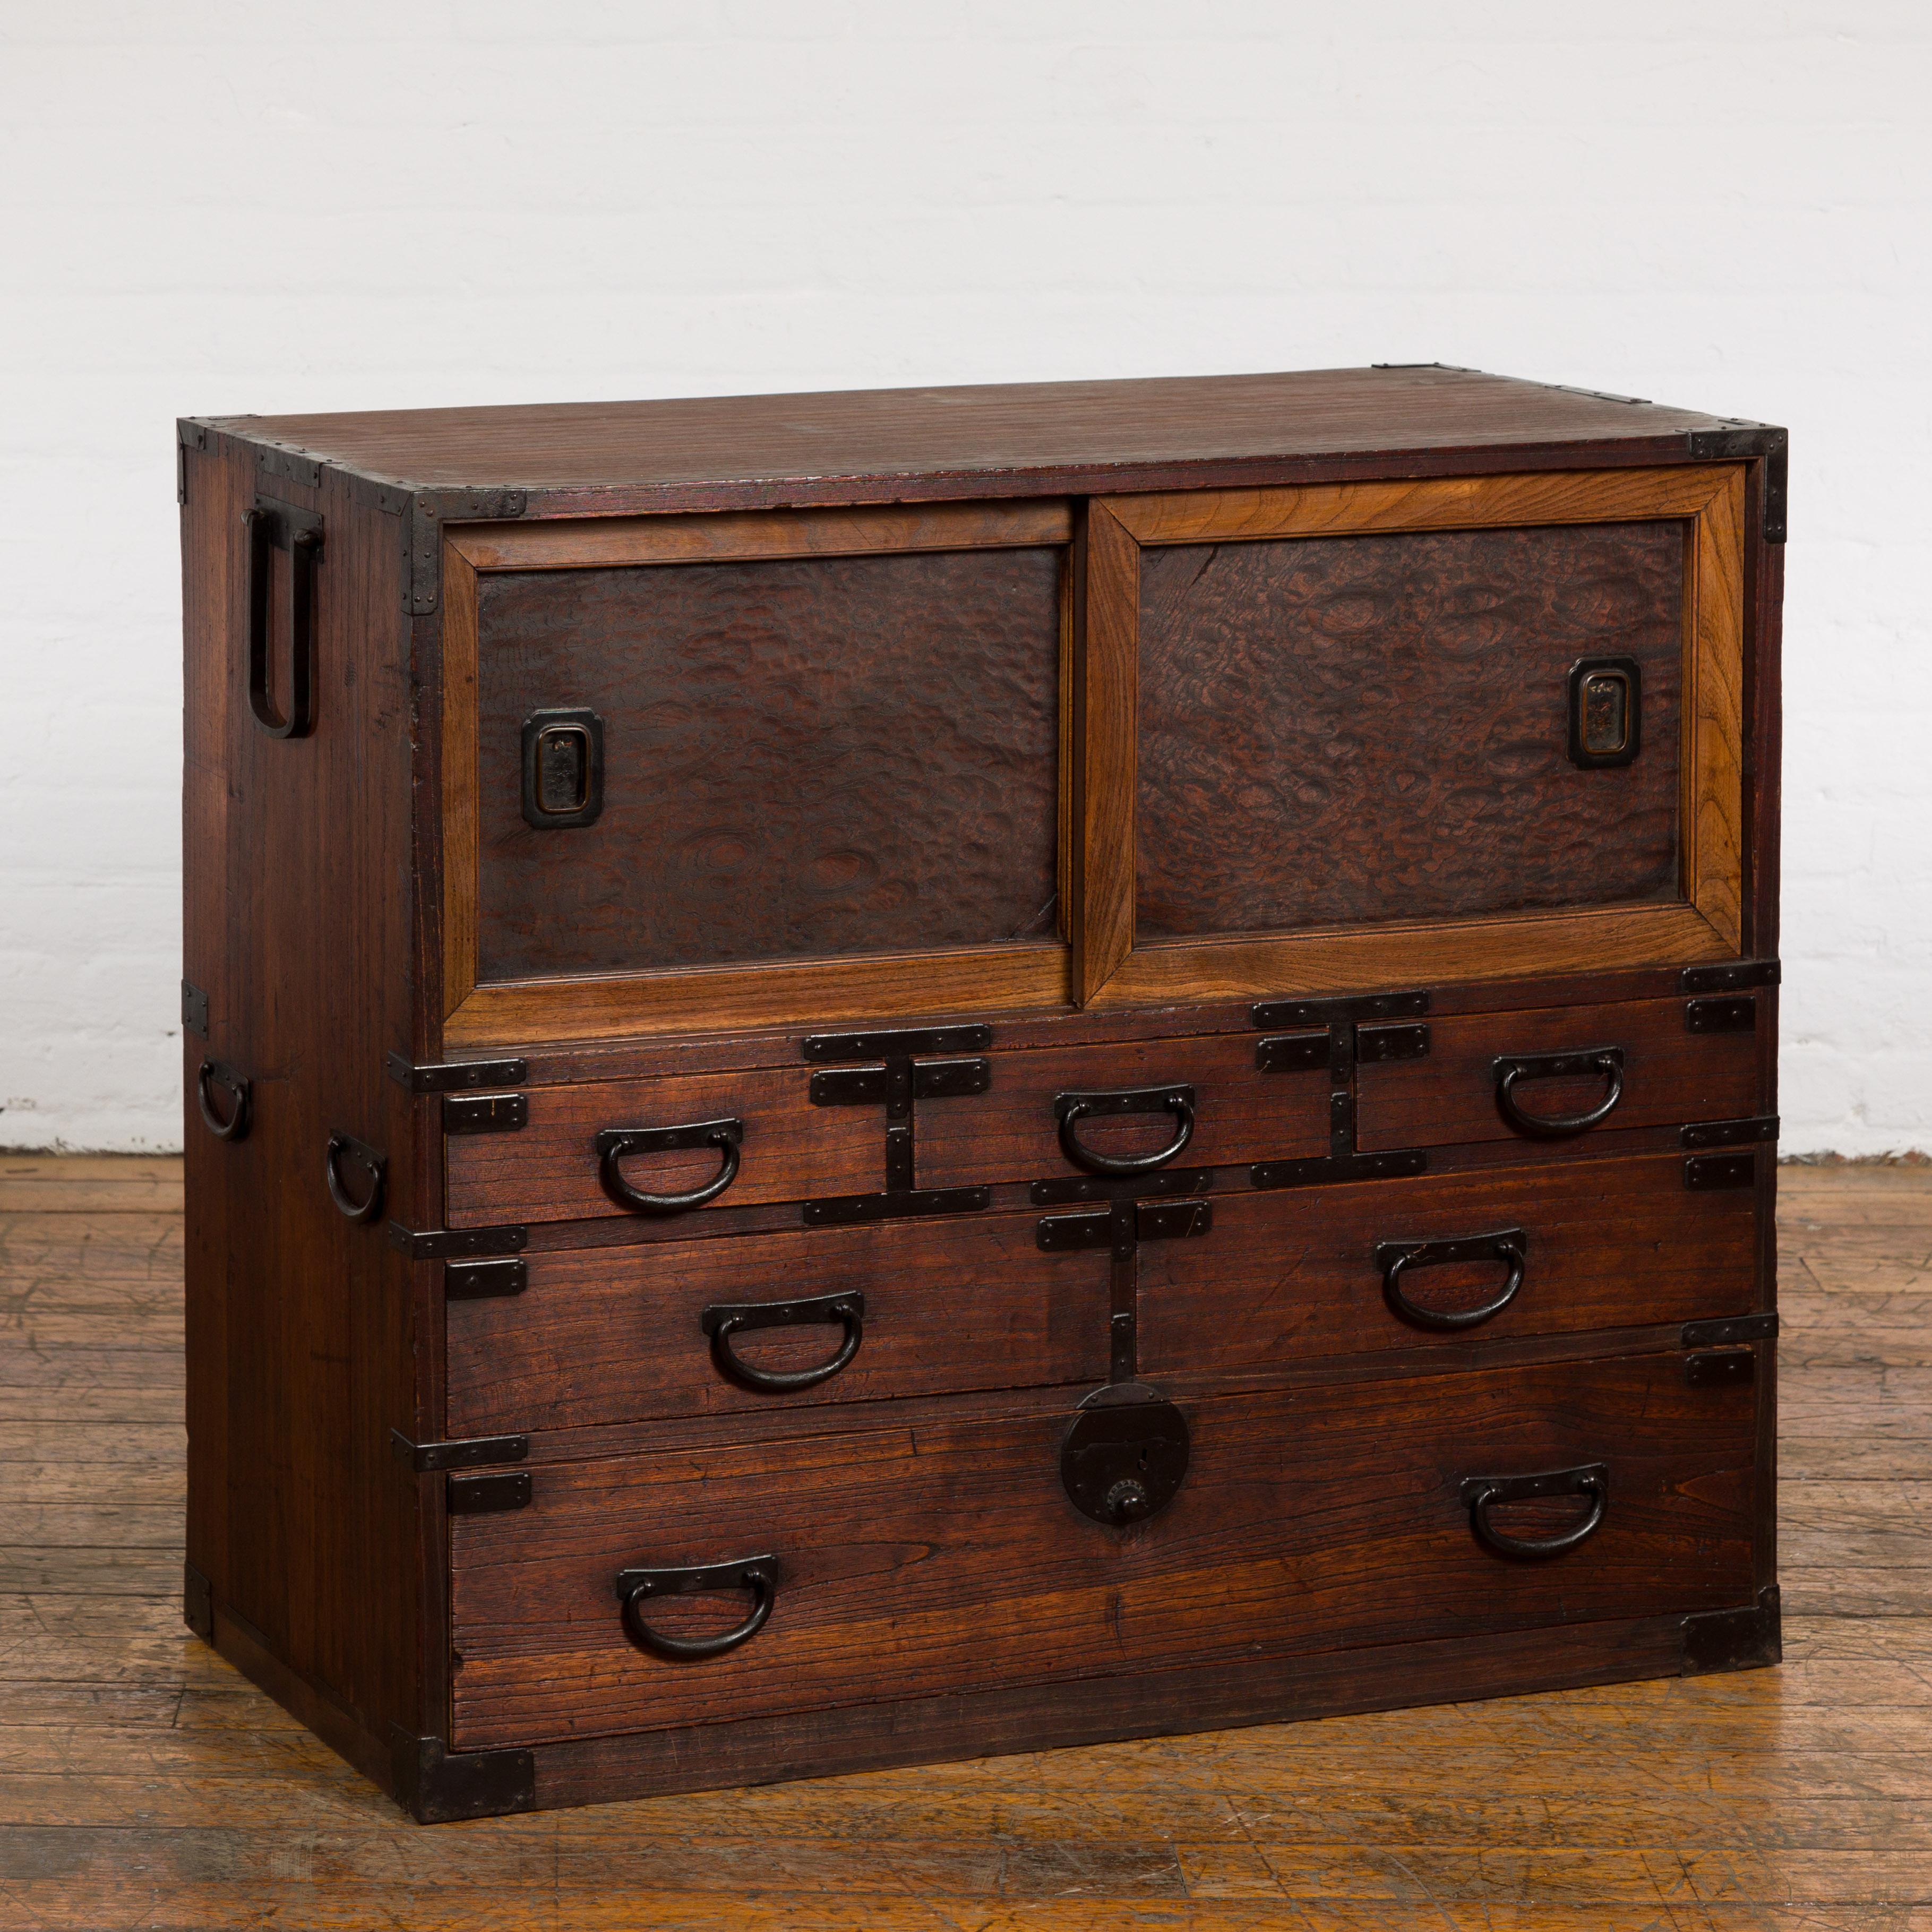 Japanese Meiji Period 19th Century Tansu Chest with Sliding Chest and Drawers For Sale 9